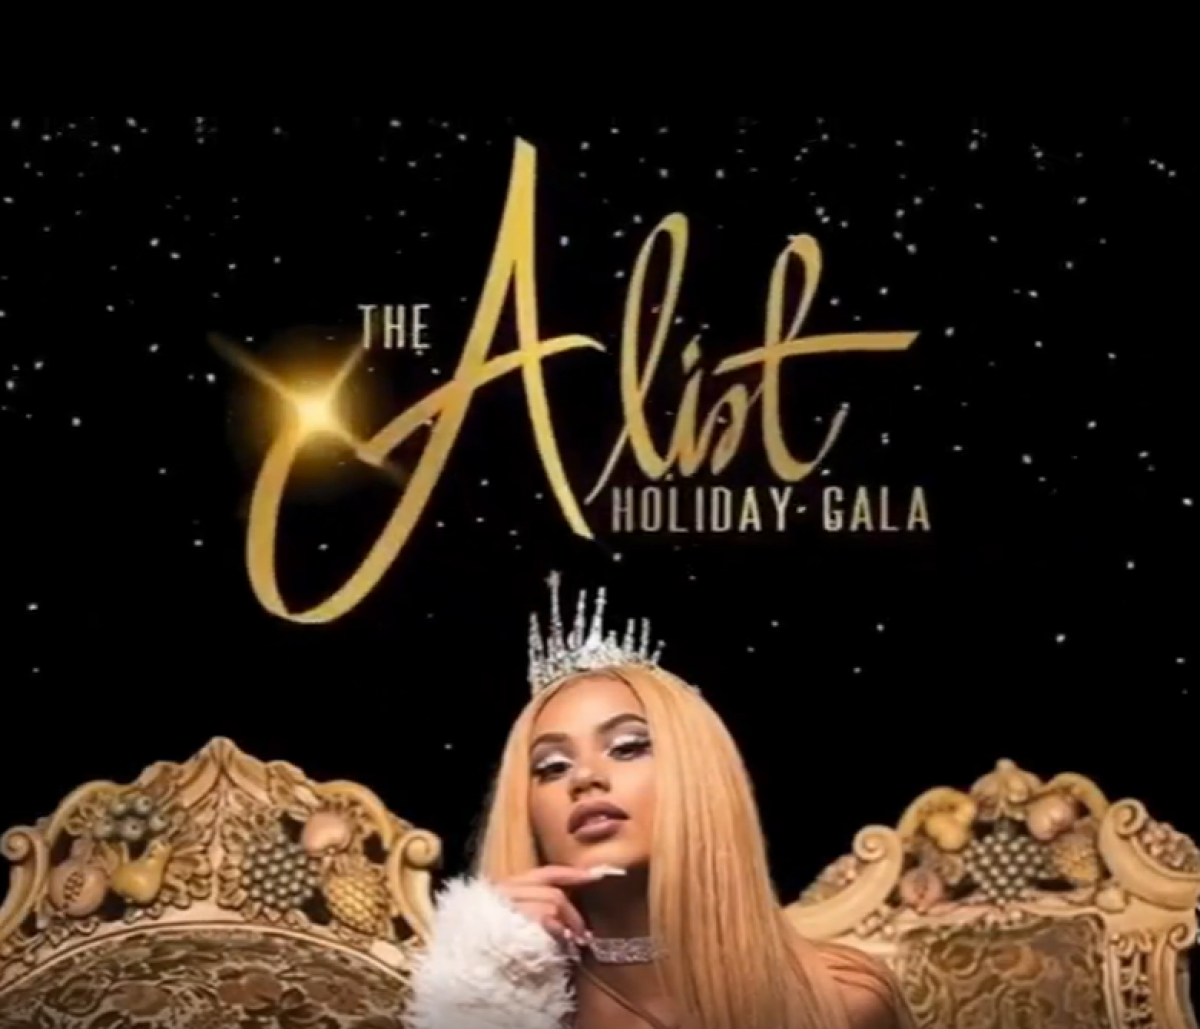 The A-List Holiday Gala flyer or graphic.